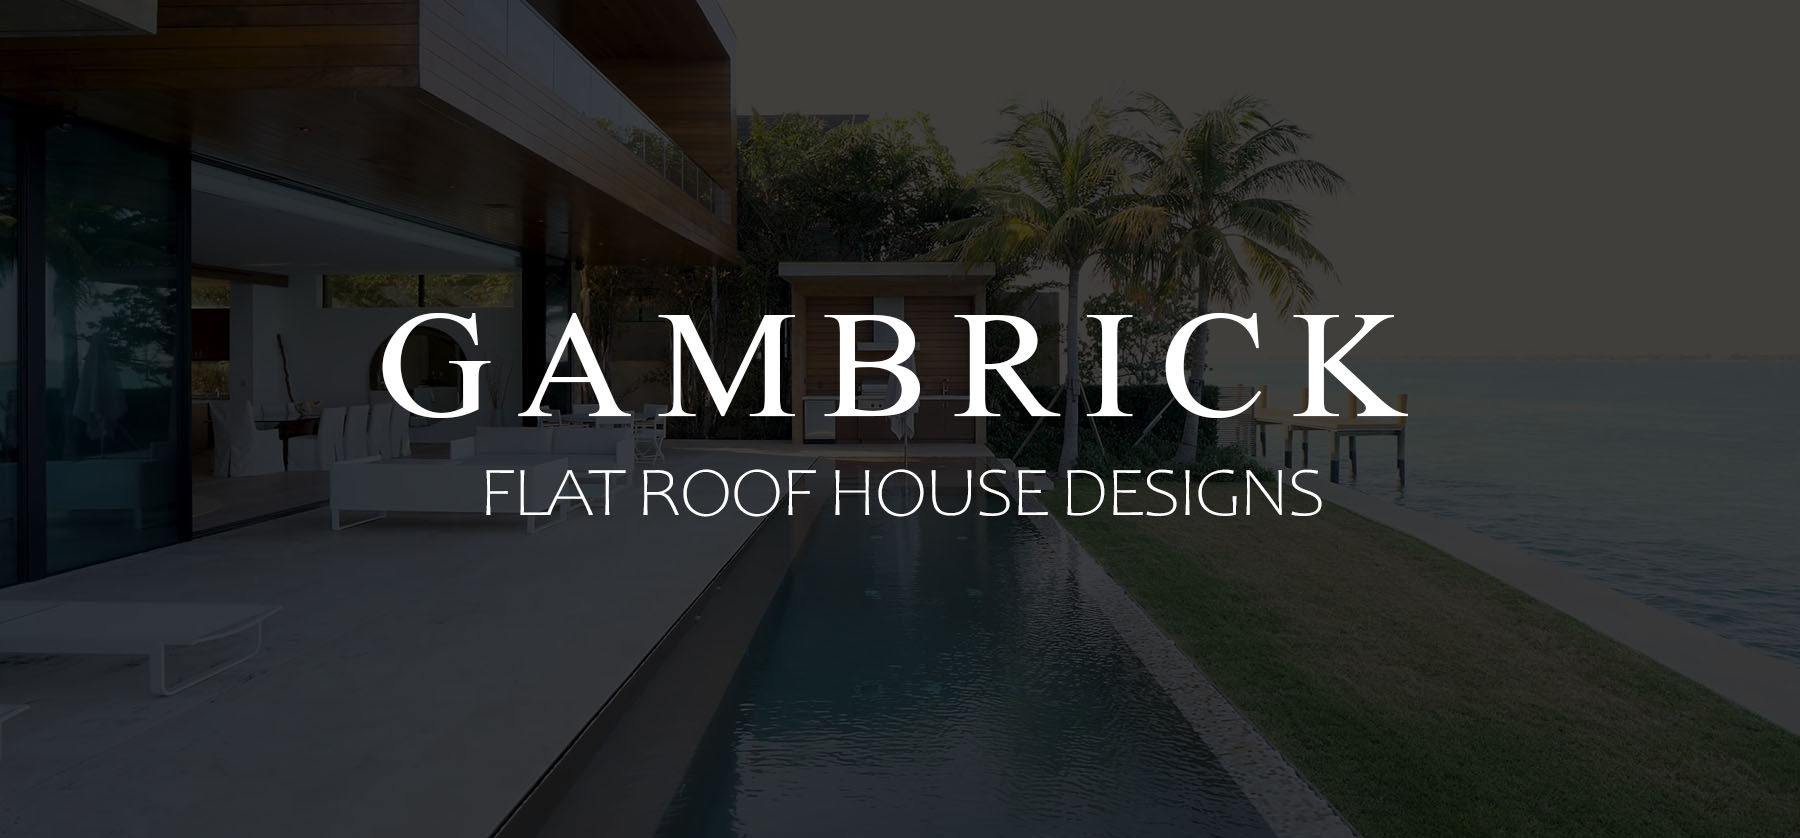 Flat roof house designs banner picture